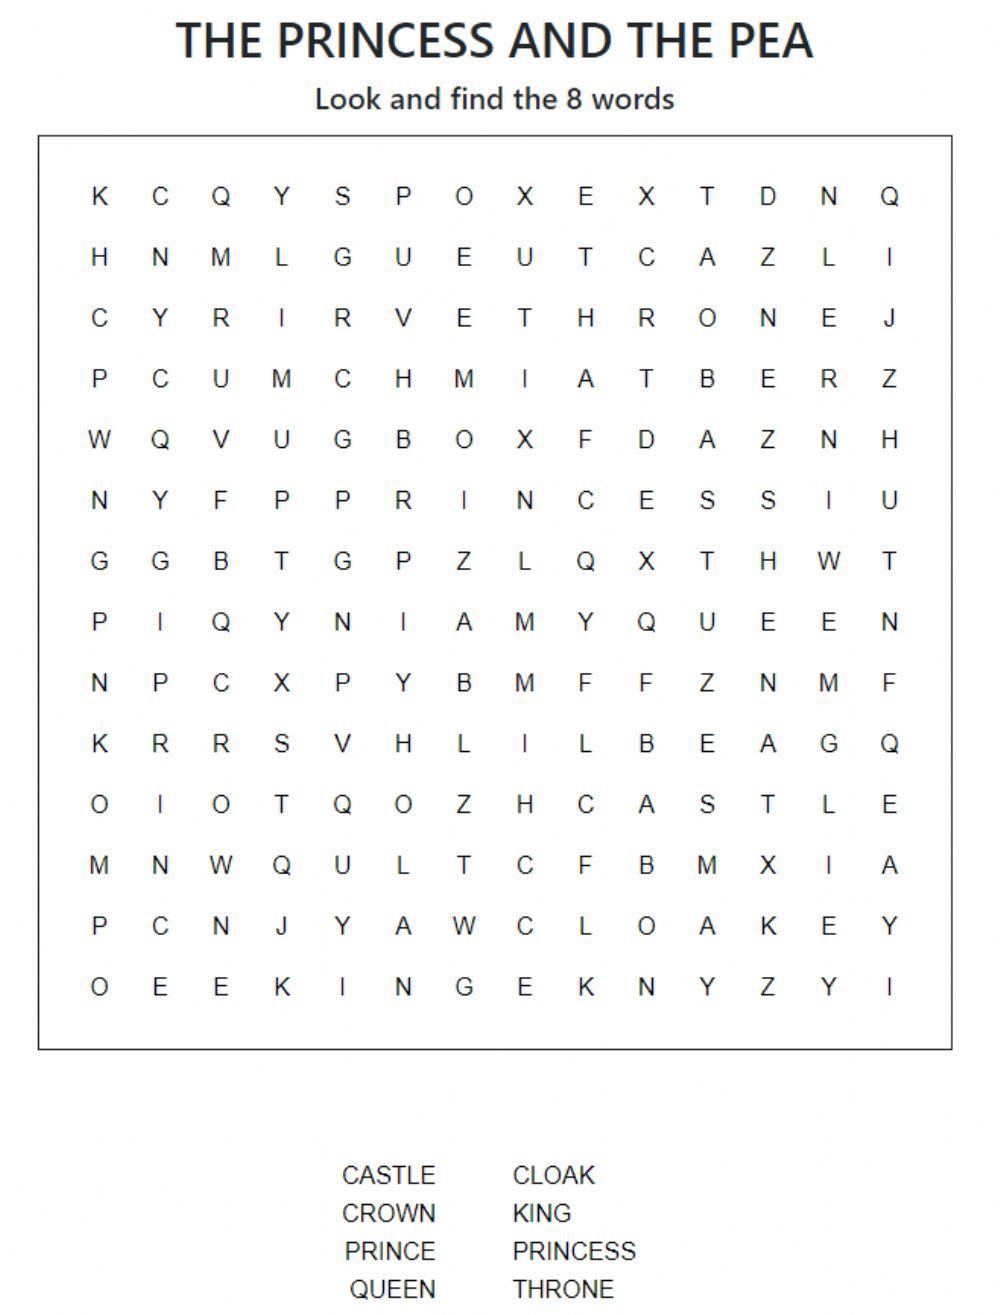 The princess and the pea - wordsearch